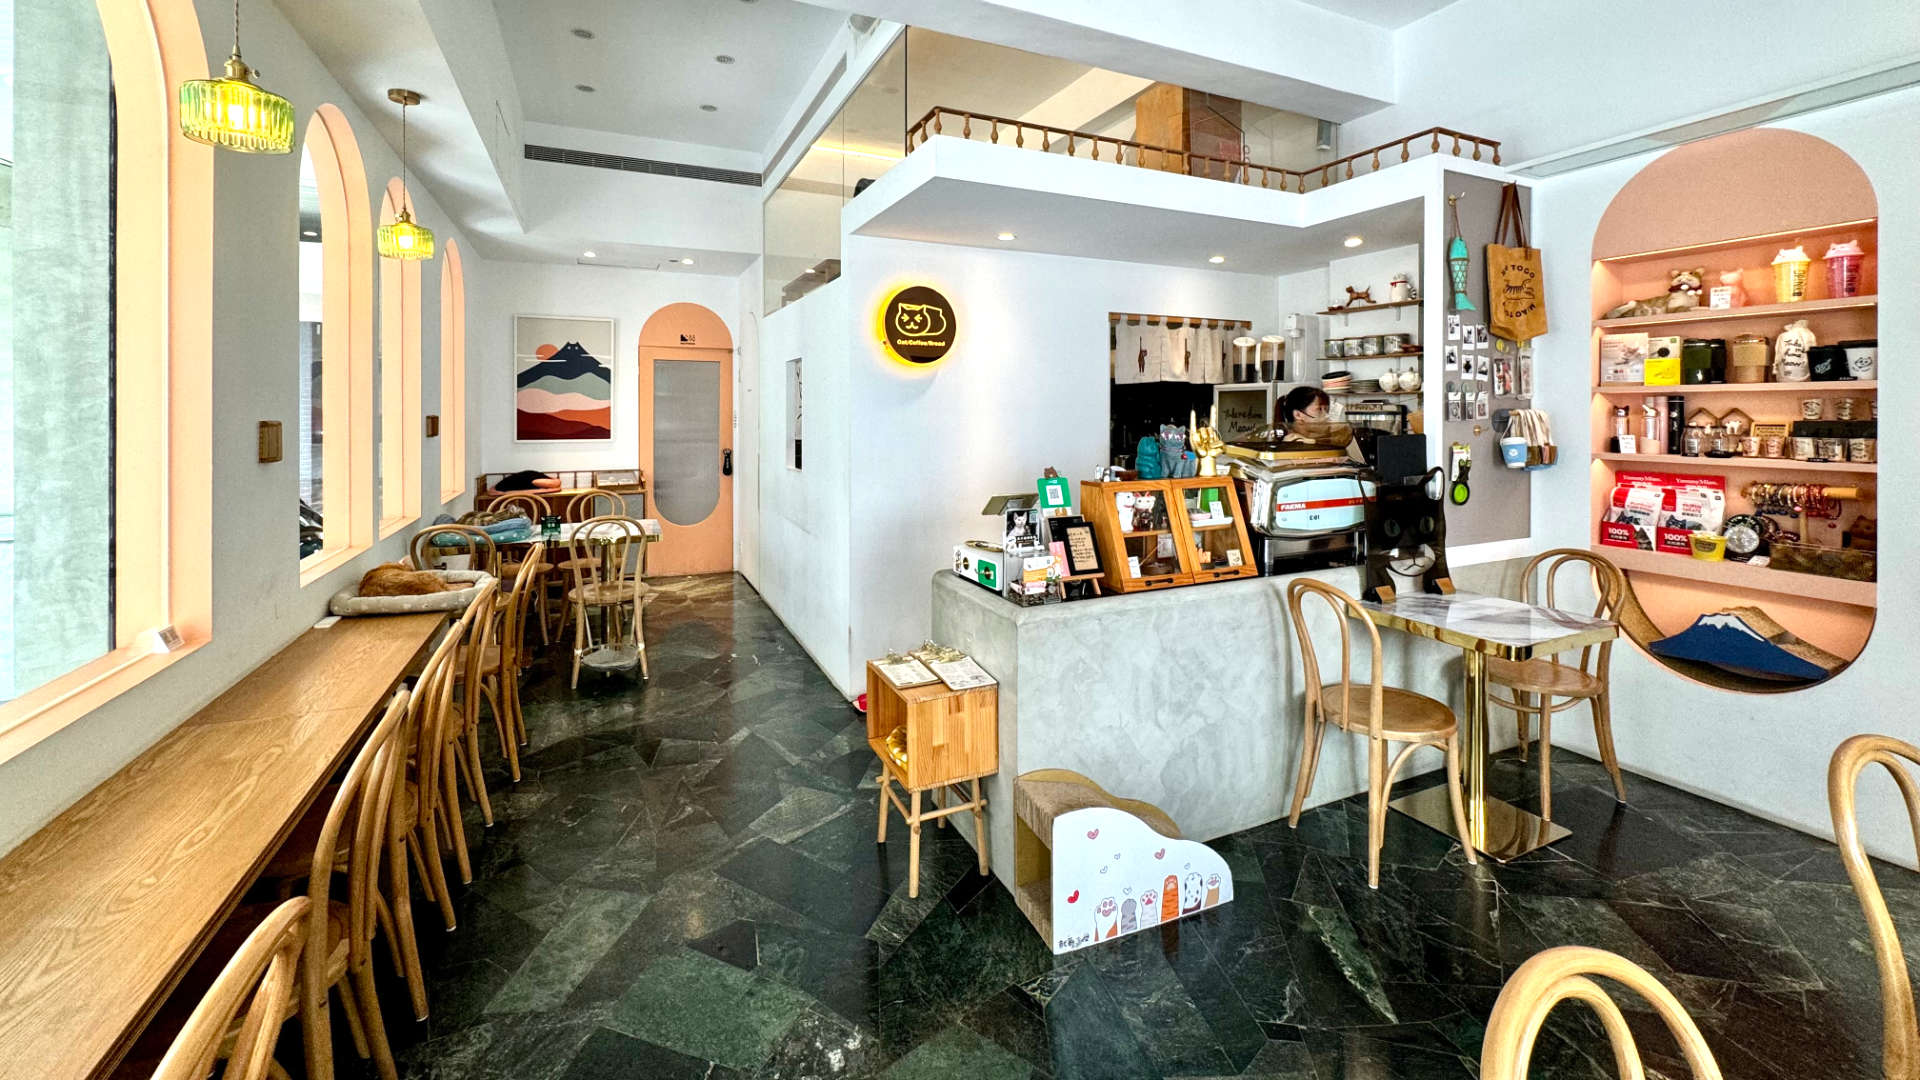 A wide-angle view of the cafe interior. There are seats lined up under the windows on the left with cats sleeping on cat beds further along the left side. On the right are some chairs and tables, and shelving covered in cat-themed items.